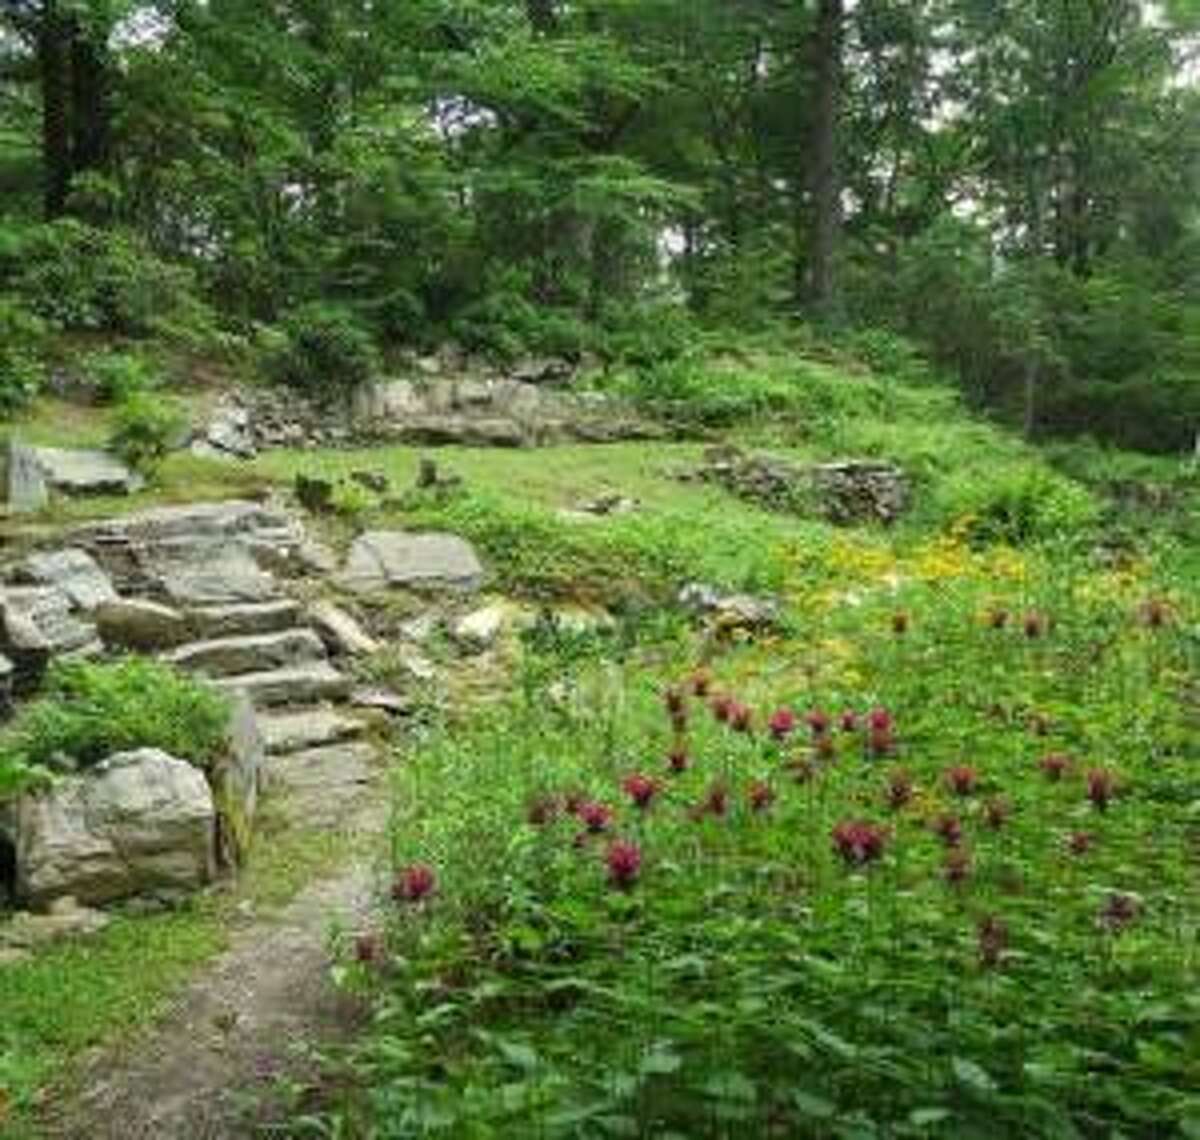 The Eklund Wildflower Garden is located at 10 Oak Valley Road, near Hope Lake in Shelton, on the site of a former upscale log cabin built in the 1930s.